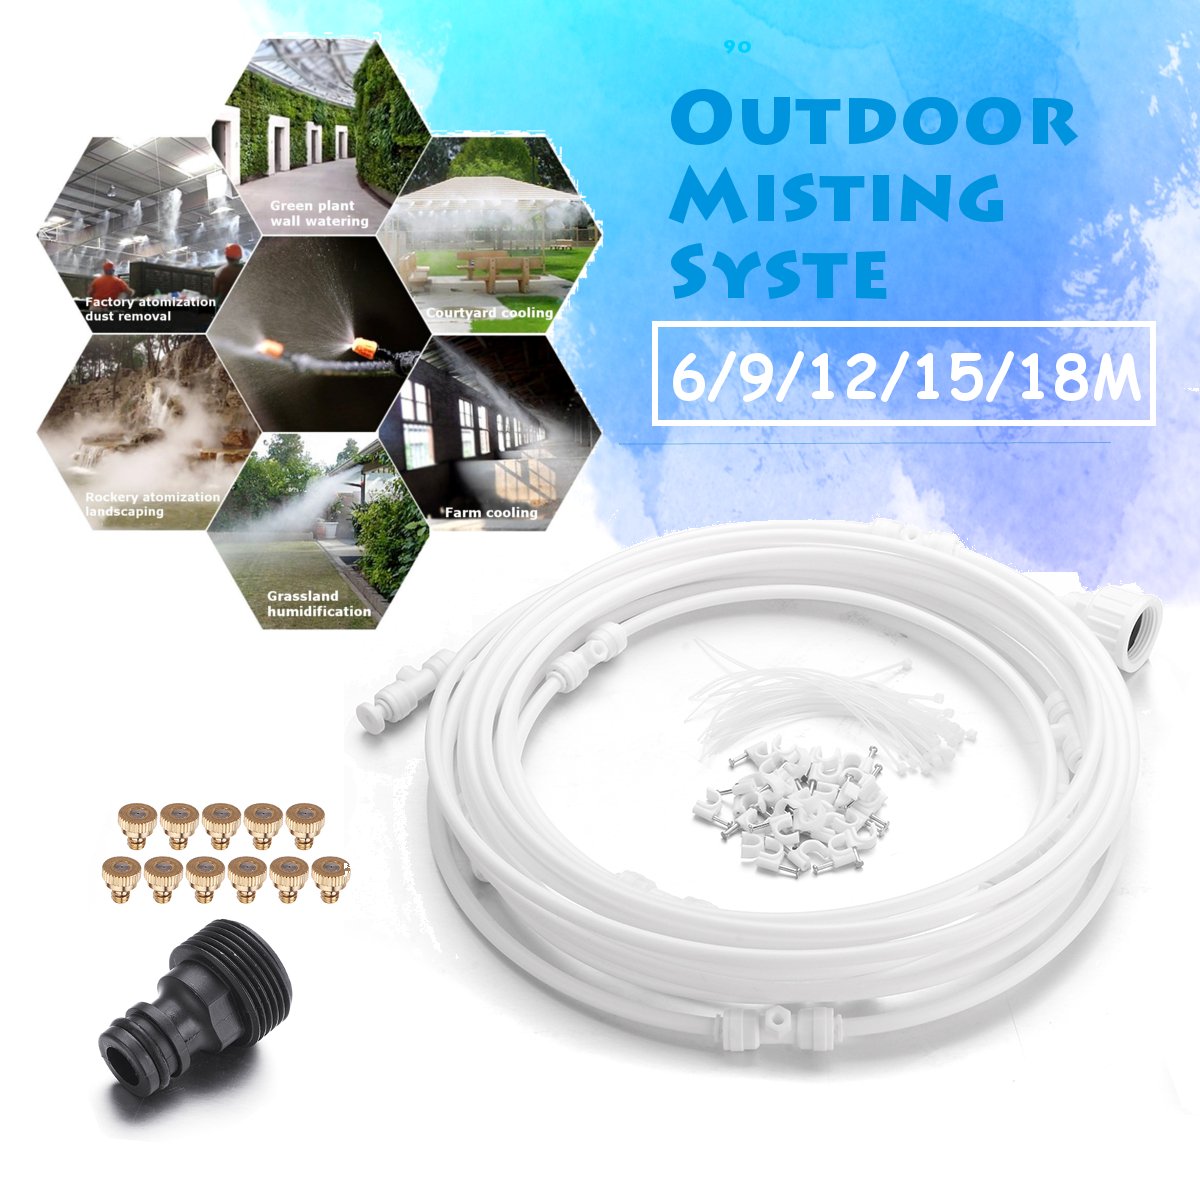 69121518M-Outdoor-Misting-Cooling-System-Garden-Drip-Irrigation-Water-Mister-Nozzles-Set-1522847-2